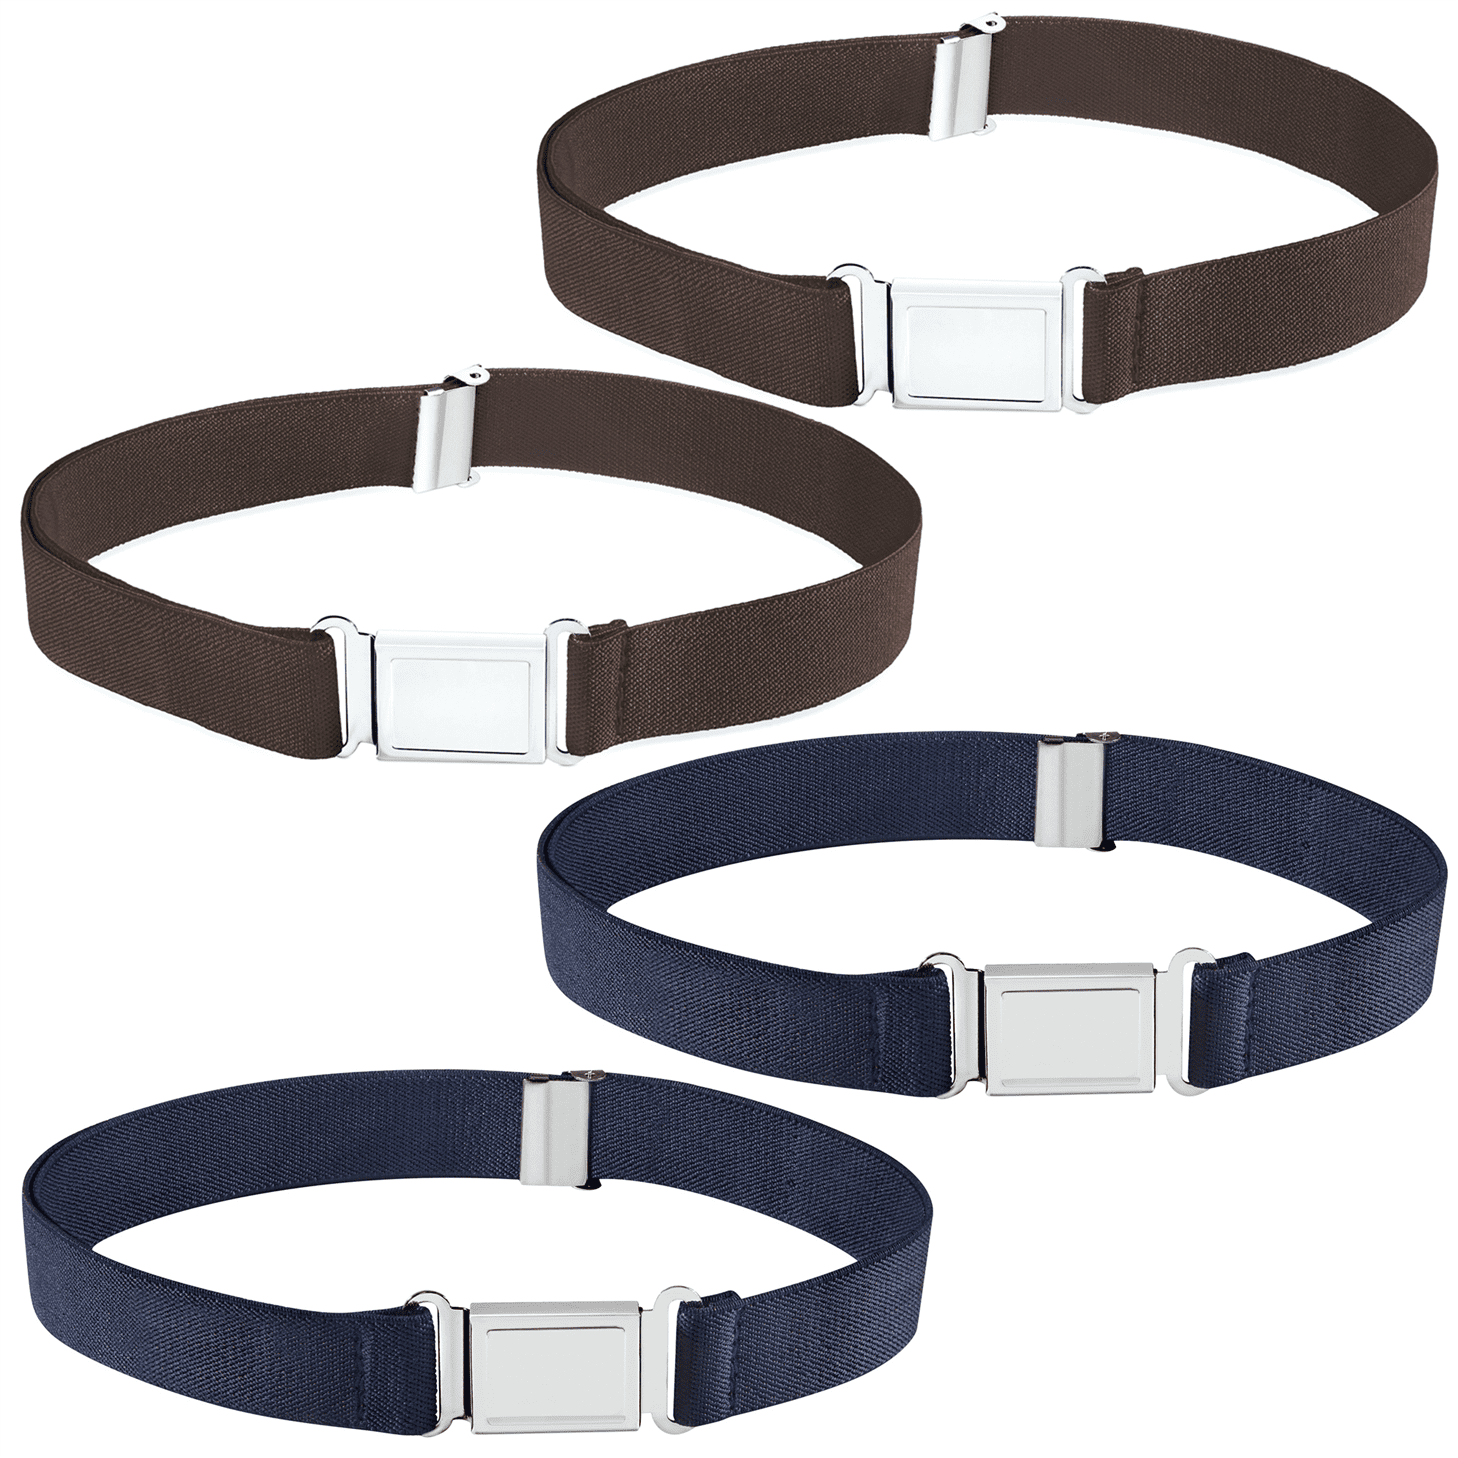 Olata Junior/Childrens 1-15 Years Adjustable Stretch Belt with Buckle/Leather Fittings 